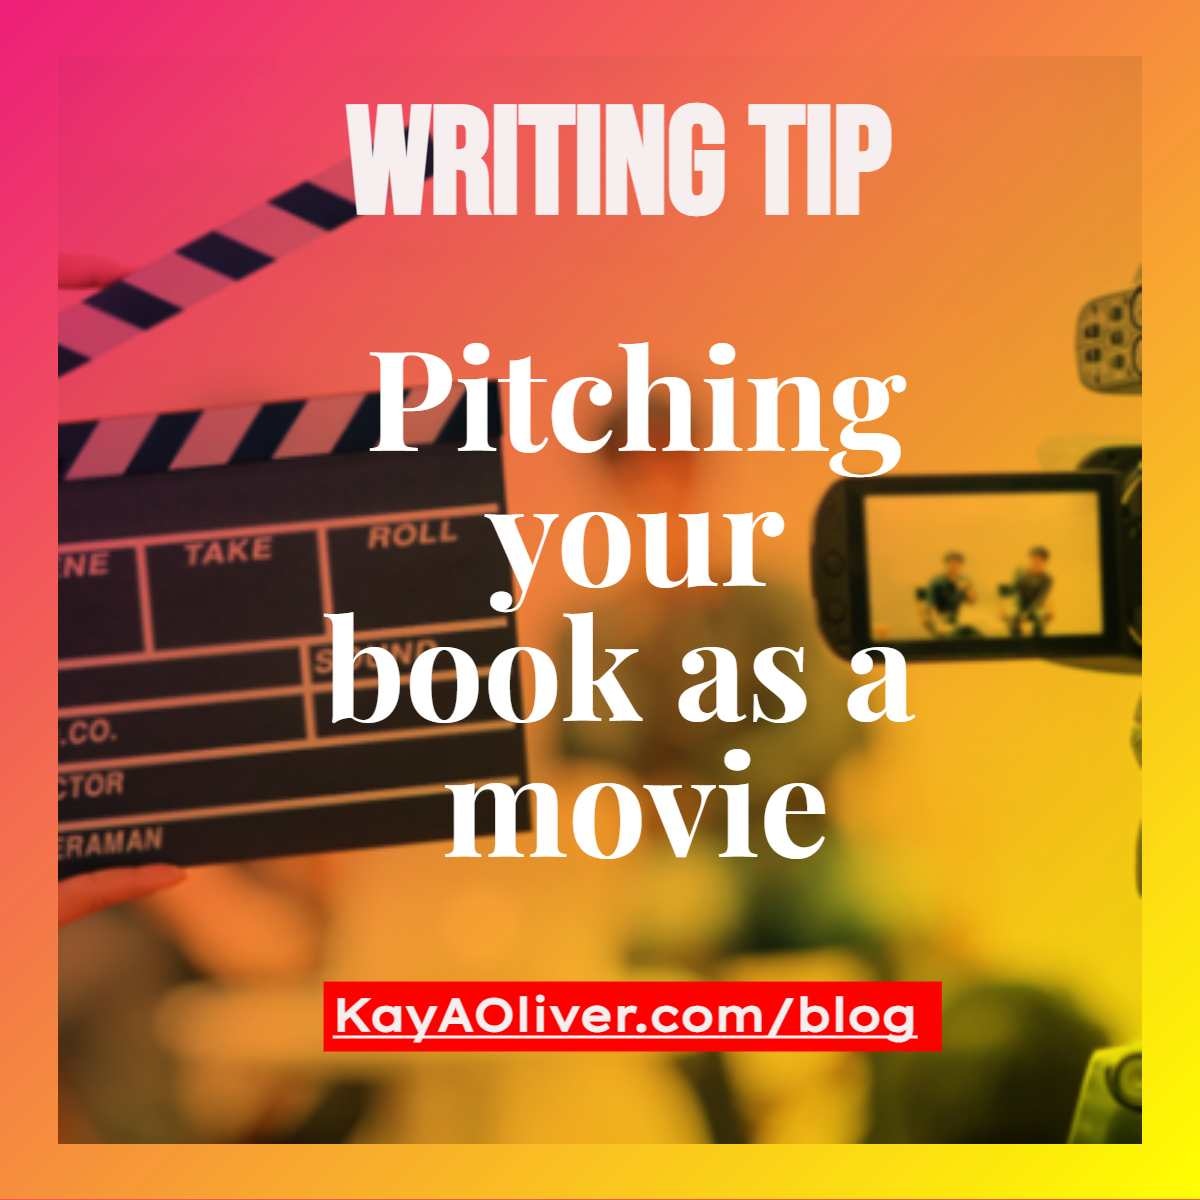 Kayaoliver.com/blog

#pitch your #books for the #bigscreen. #writingtips from a #hollywoodinsider. #bookstofilm #readingcommunity #writingcommunity #writingblog